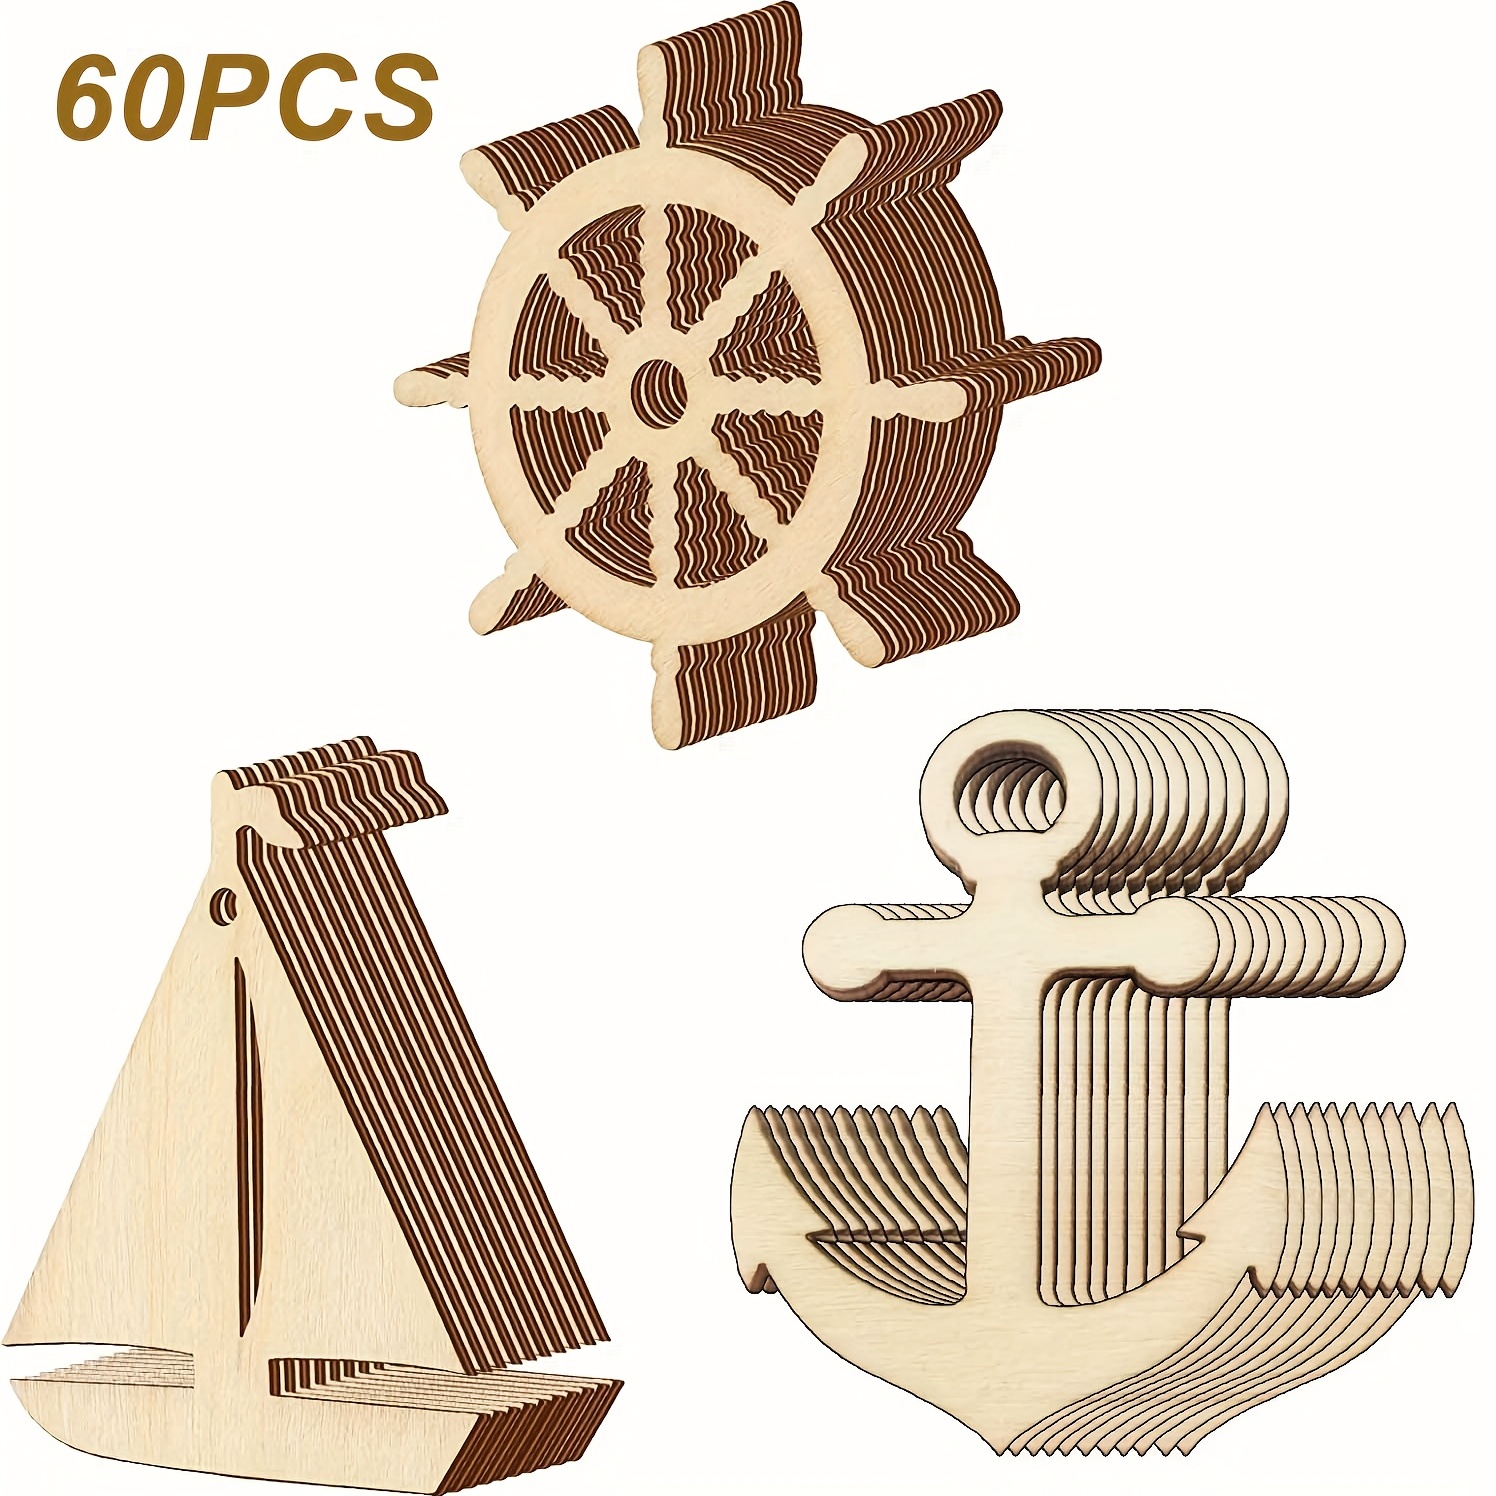 60pcs Wooden Anchor For Crafts, Wood Anchor Cutouts, Sailboat Wheel  Nautical Decor Wood Paint Crafts For DIY Hanging Ornaments With Rope, For  Party Ho